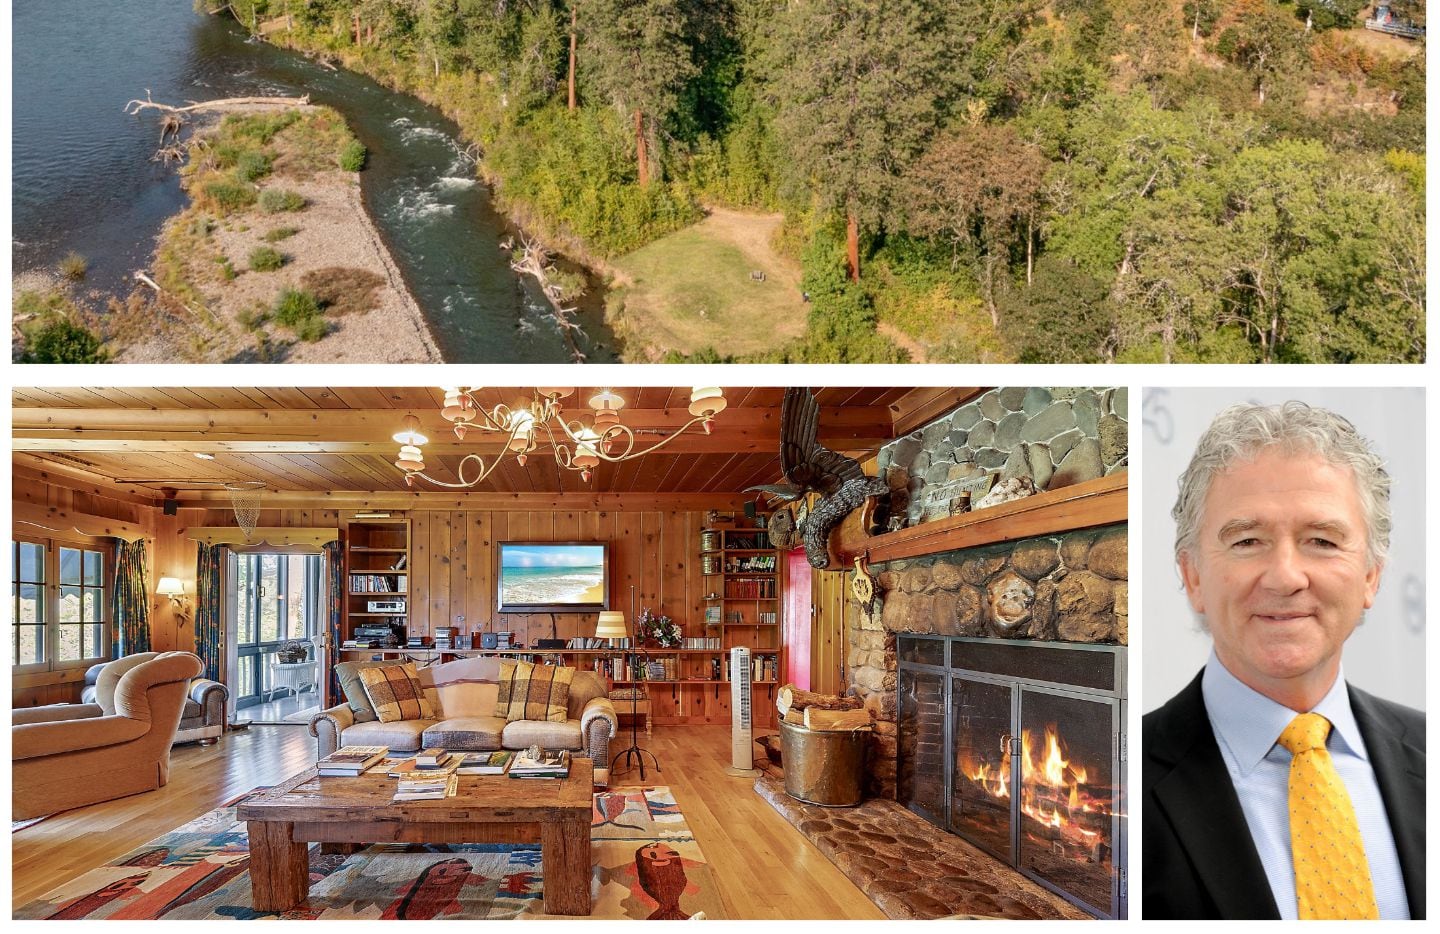 Patrick Duffy's ranch includes 2 miles of river frontage with steelhead trout and salmon,...